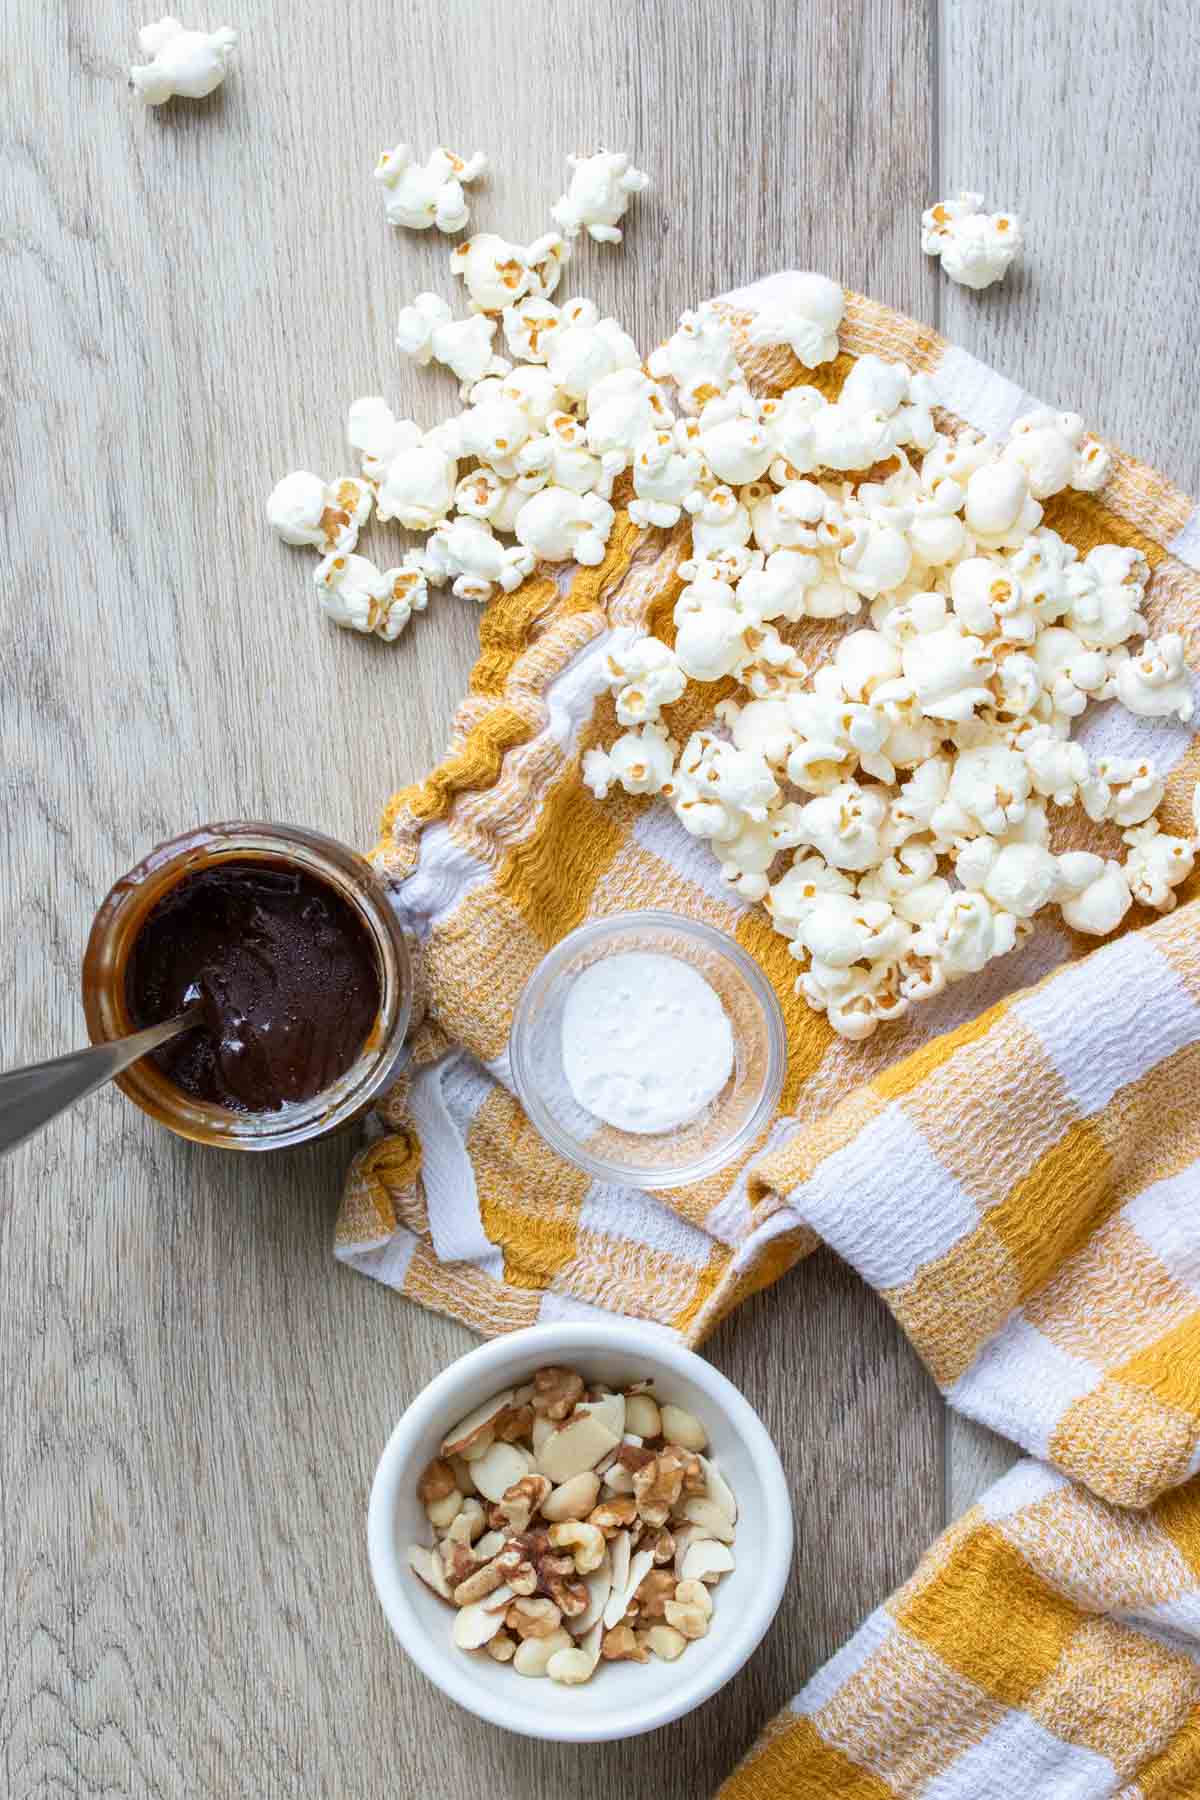 Popcorn, and containers with nuts, caramel and baking soda next to a yellow checkered towel